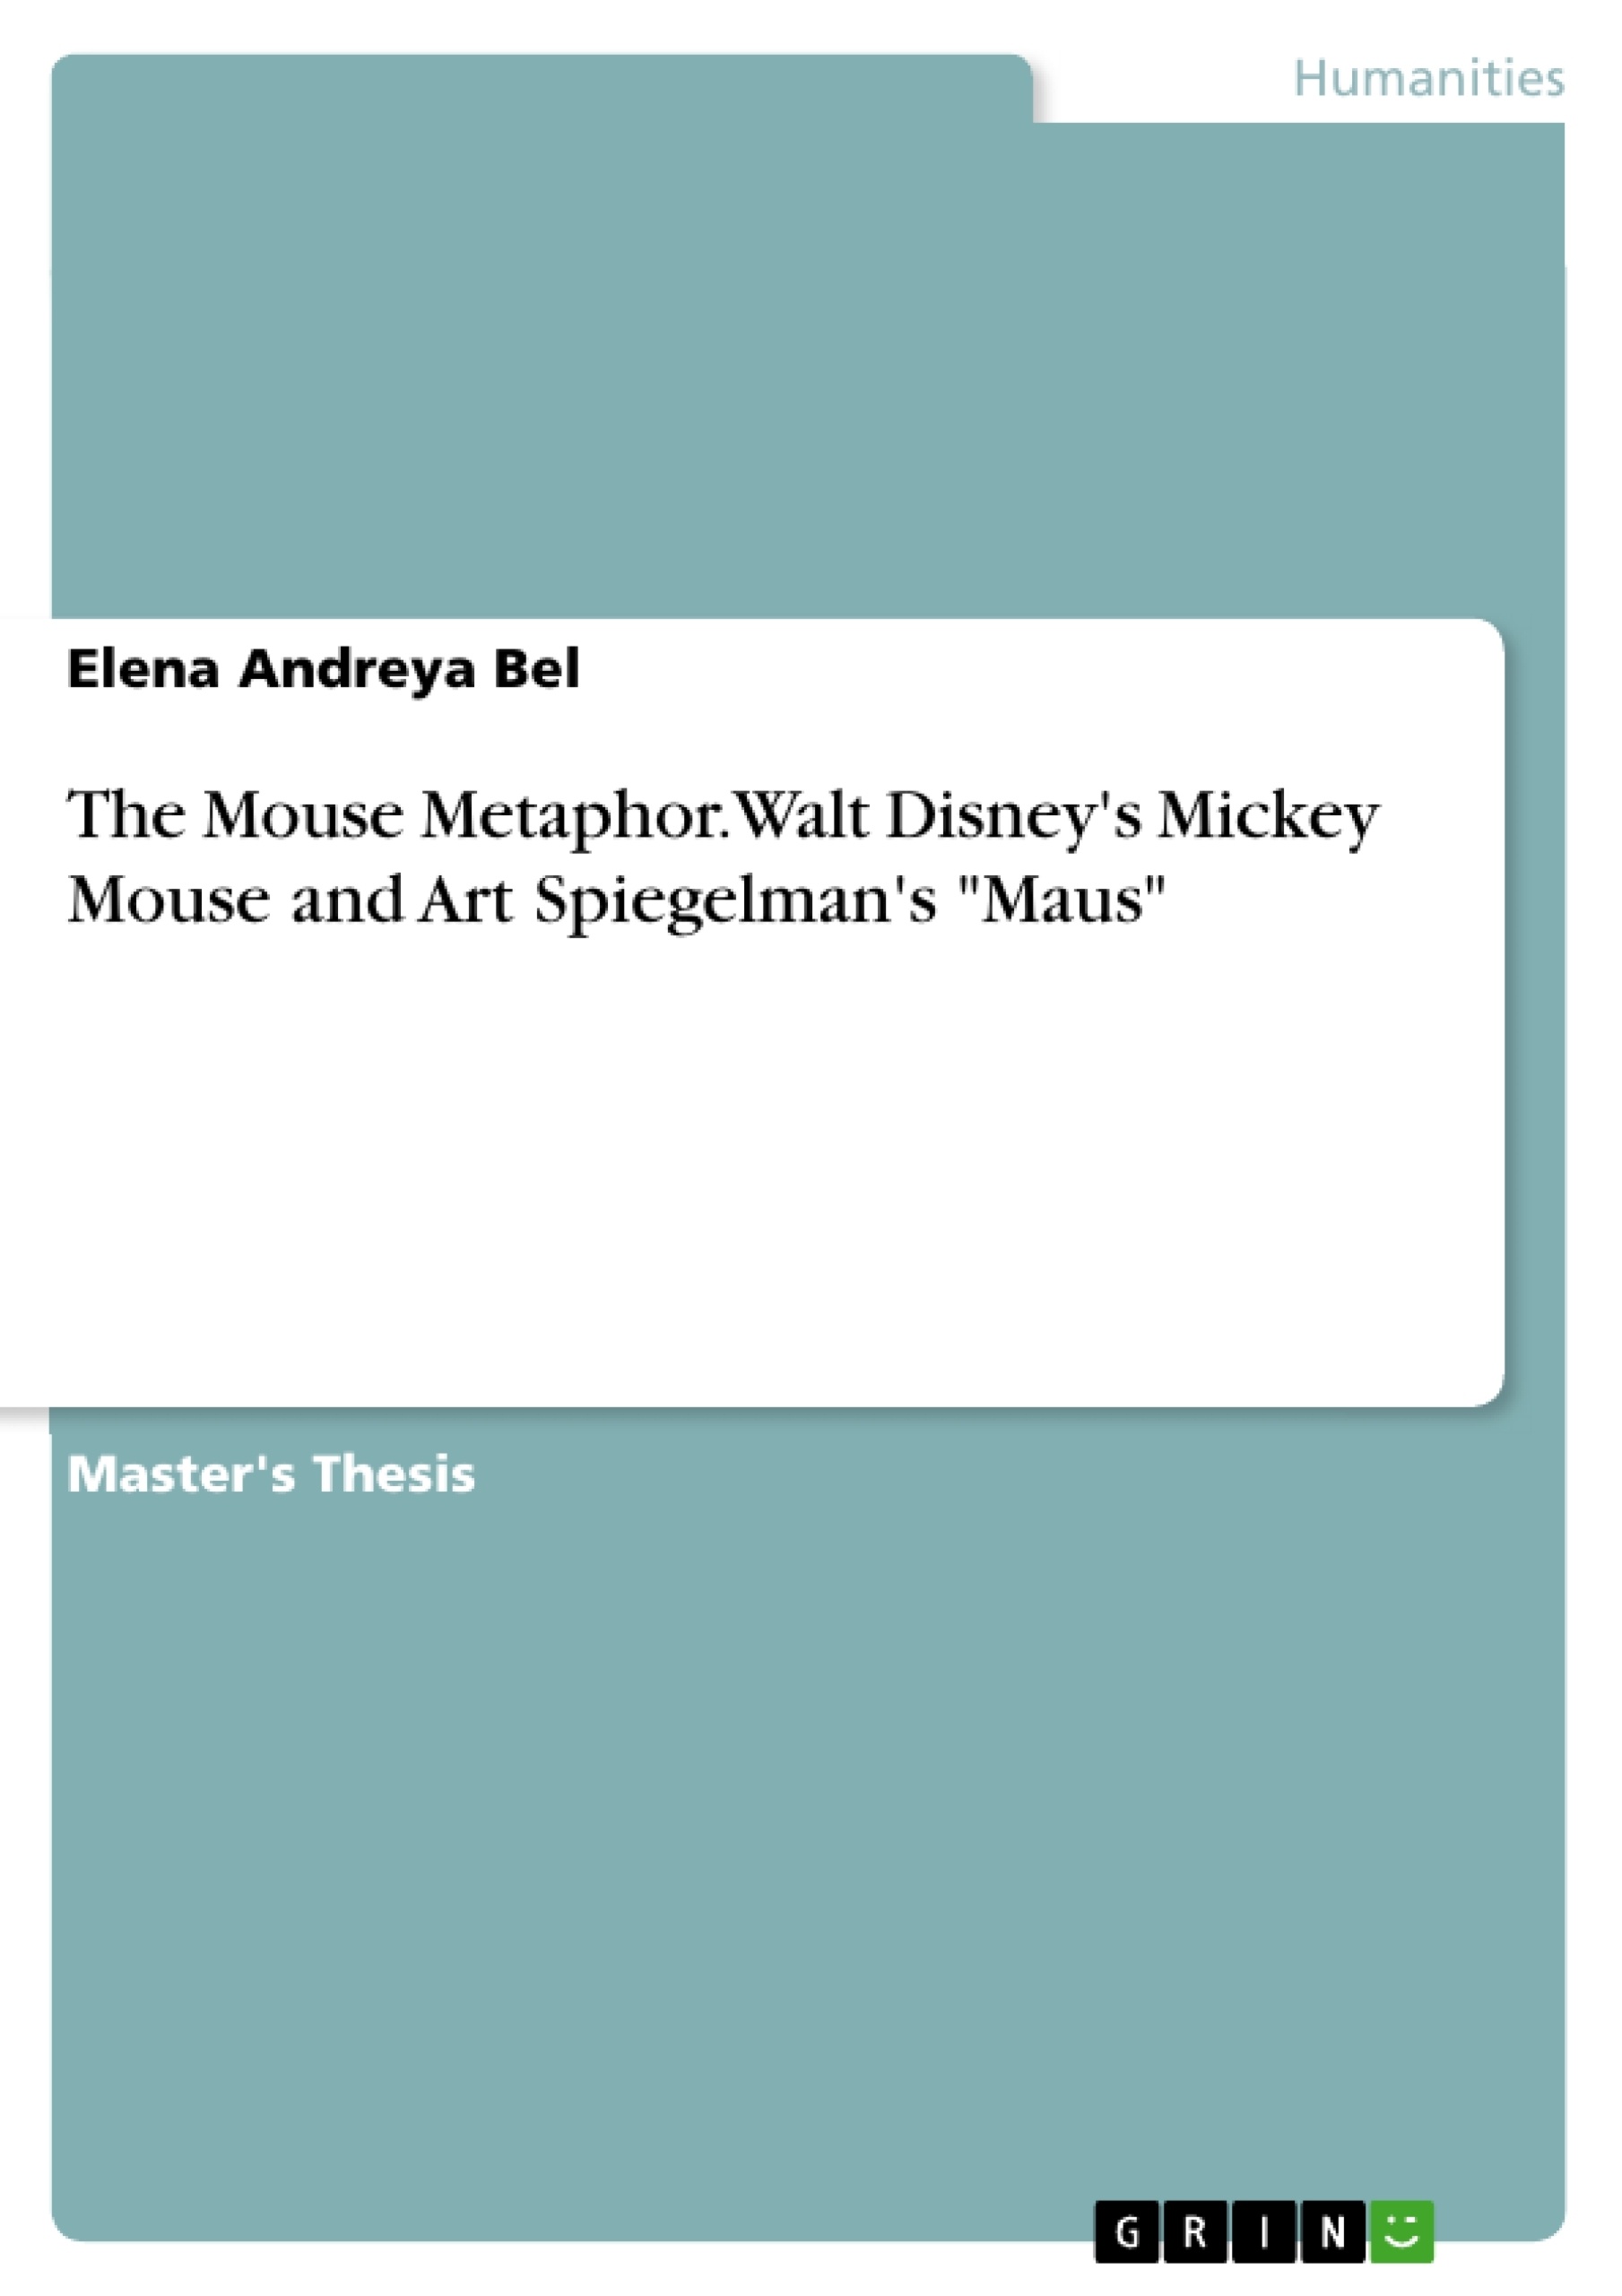 Title: The Mouse Metaphor. Walt Disney's Mickey Mouse and Art Spiegelman's "Maus"